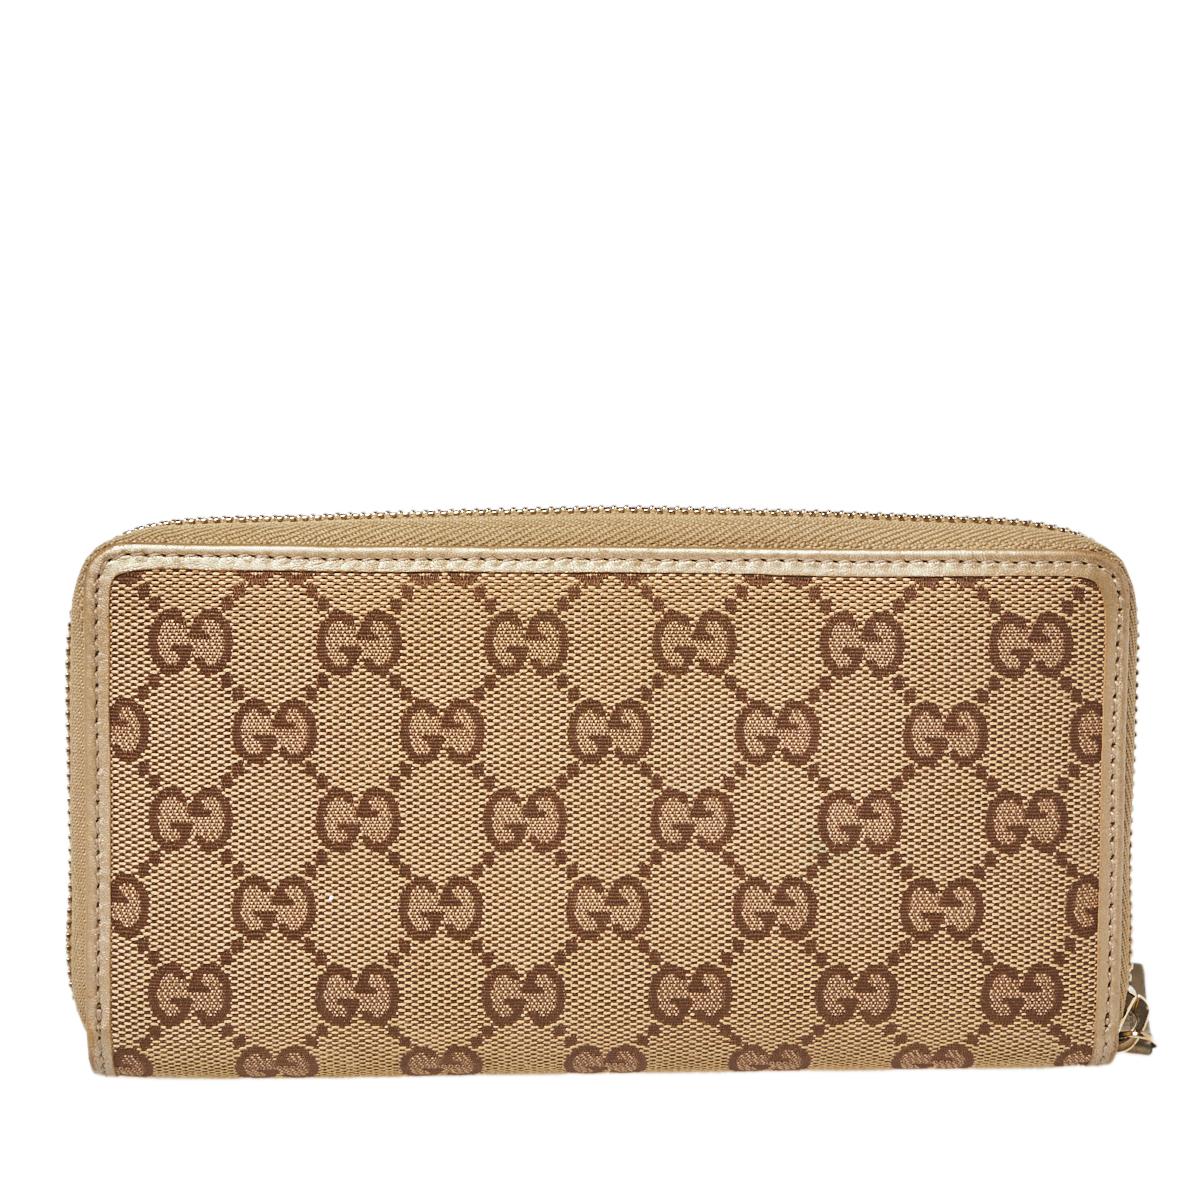 Made of signature GG canvas and leather dual hues, this Mayfair zip-around wallet from Gucci is a classy choice. The zip-around opens to multiple card slots and a zipped pocket. This wallet is complete with bow detail on the front with the signature